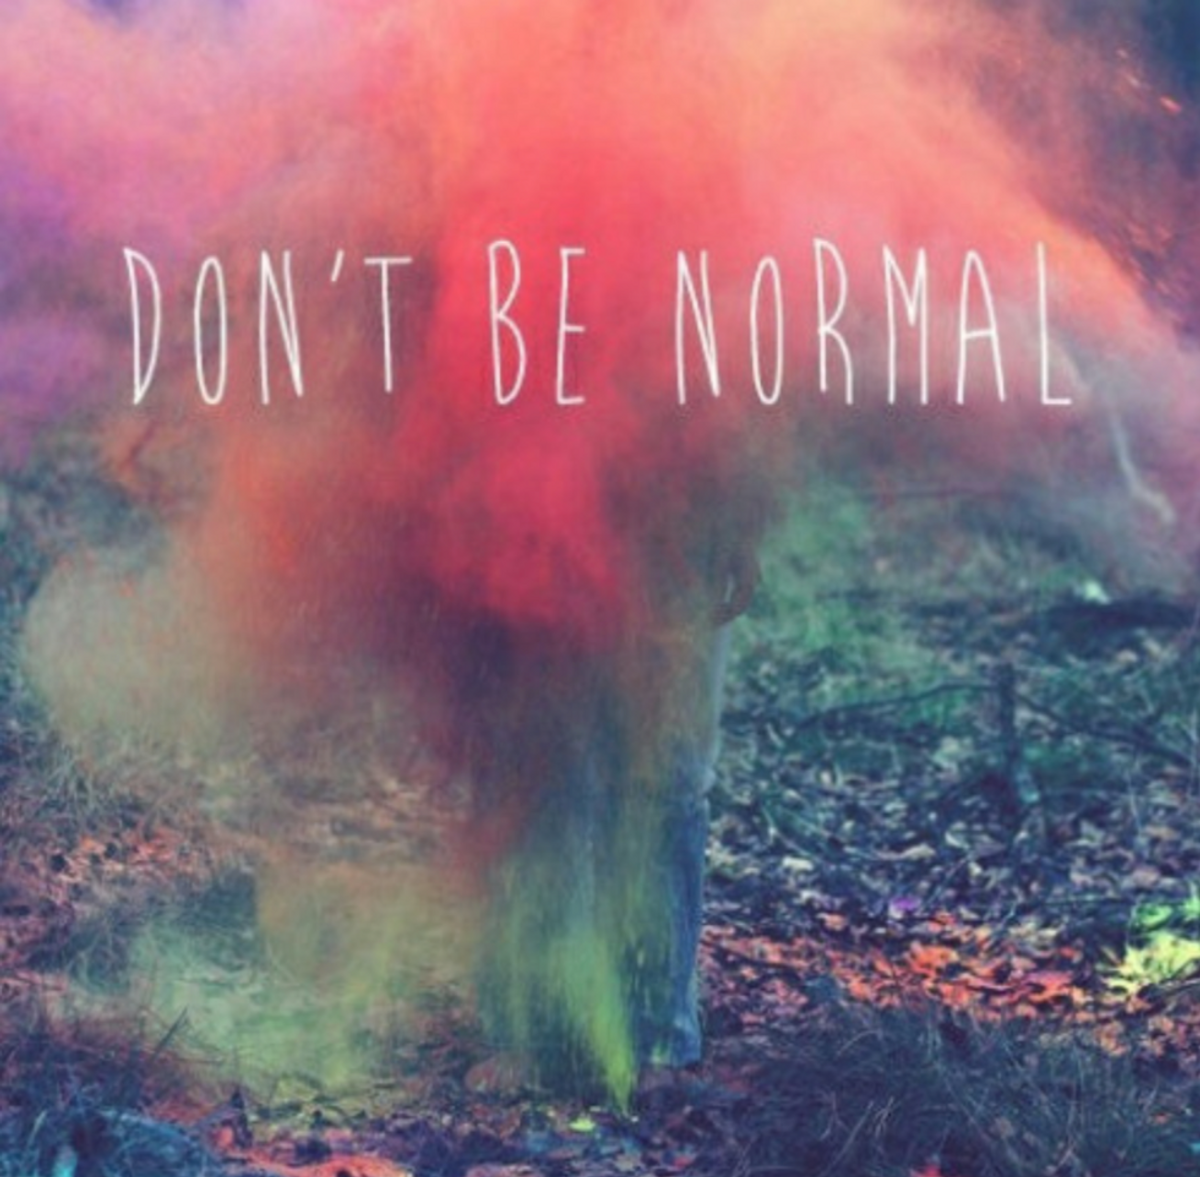 10 Signs You're Normal